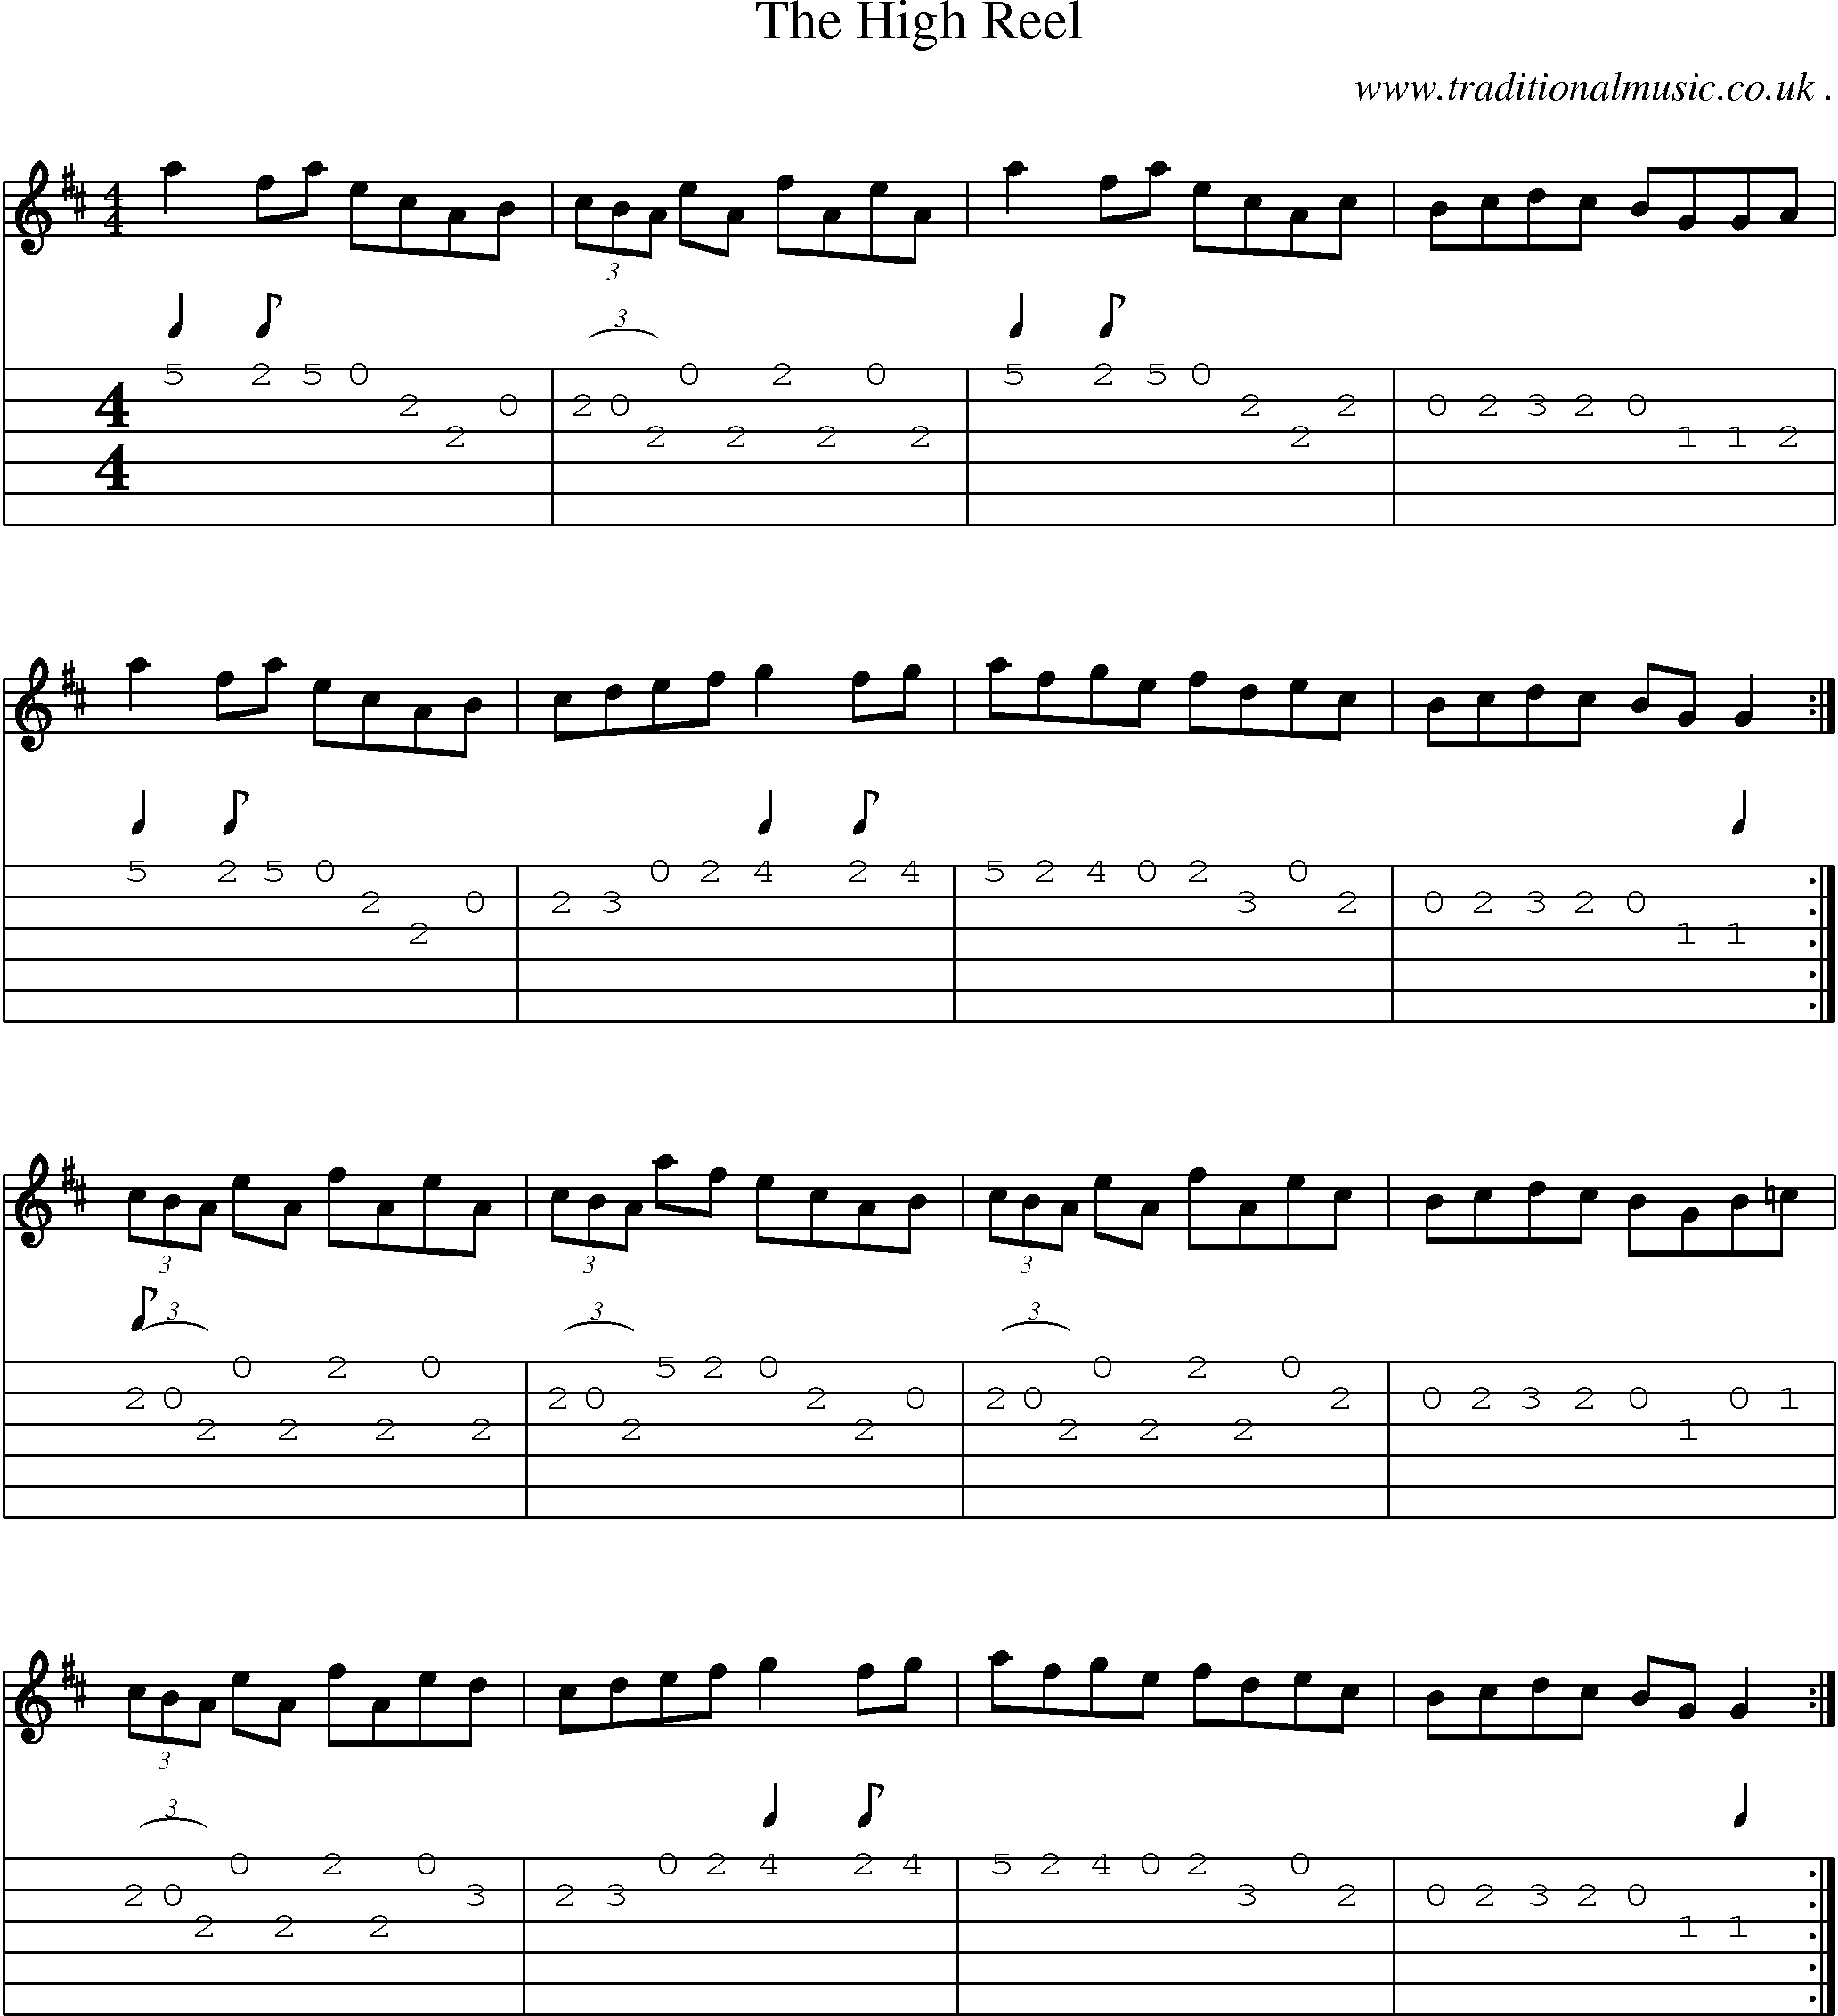 Sheet-music  score, Chords and Guitar Tabs for The High Reel